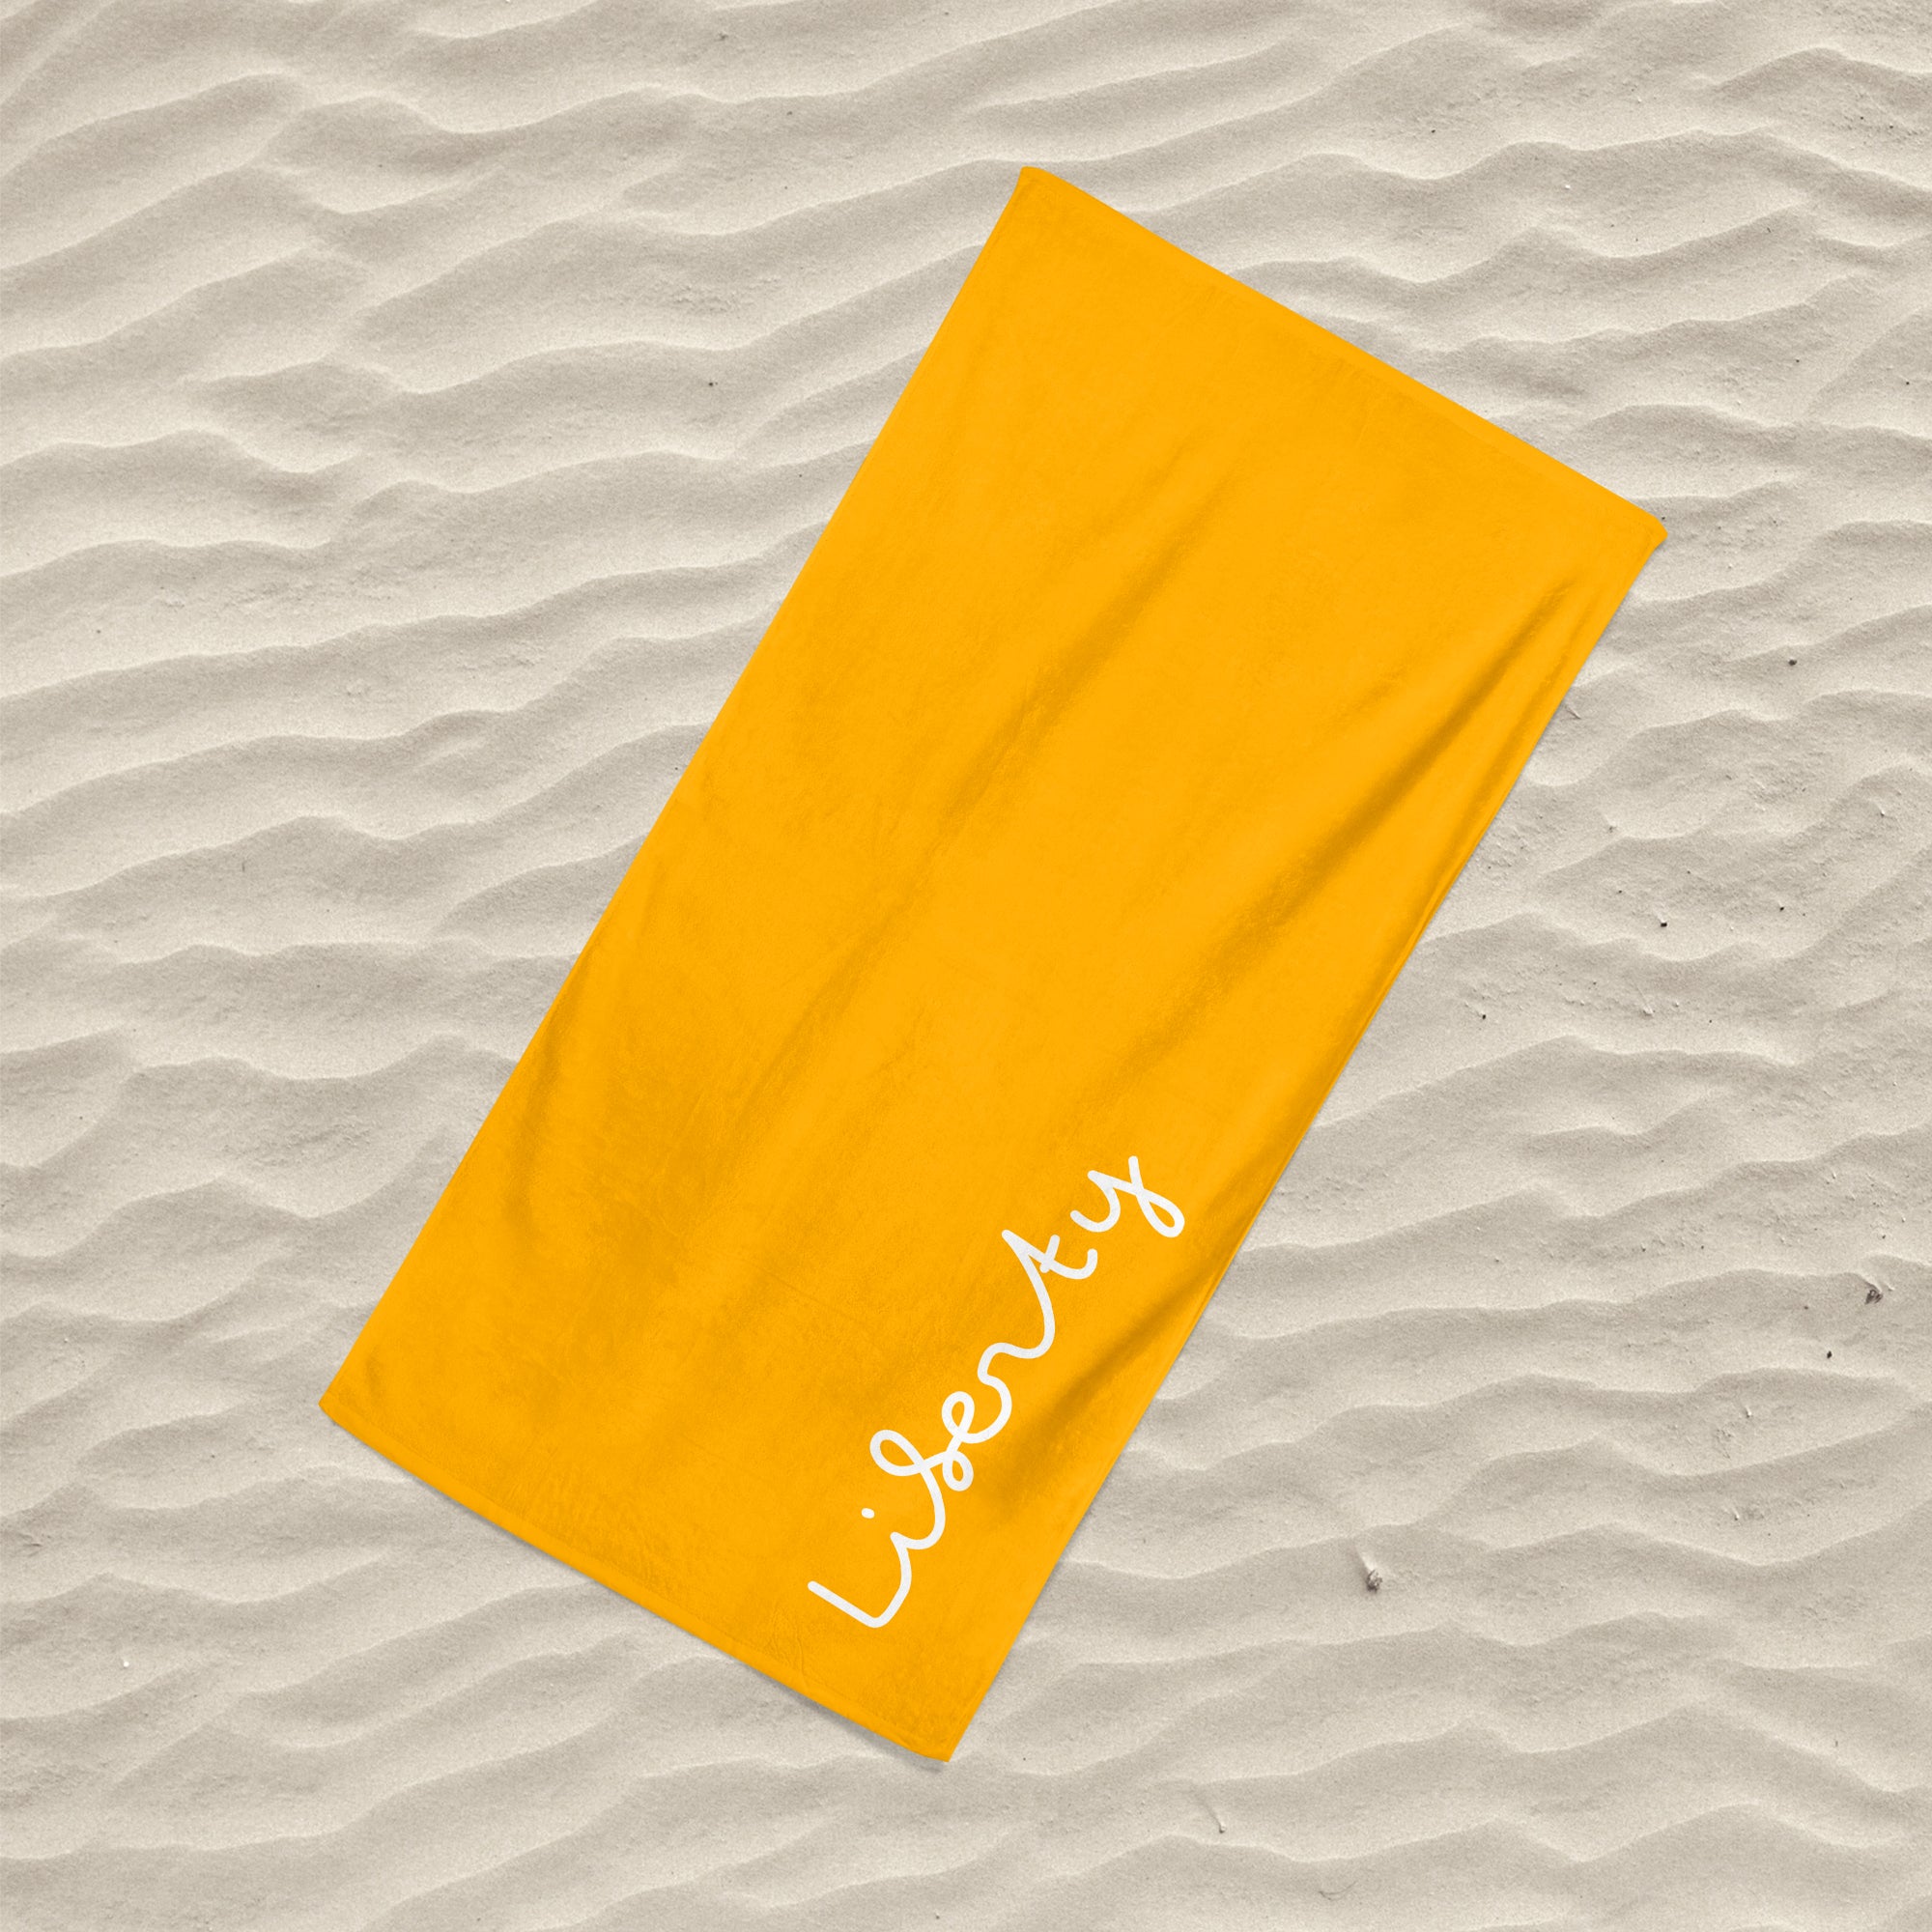 Island Inspired Beach Towel White on Orange - Personalise with Name